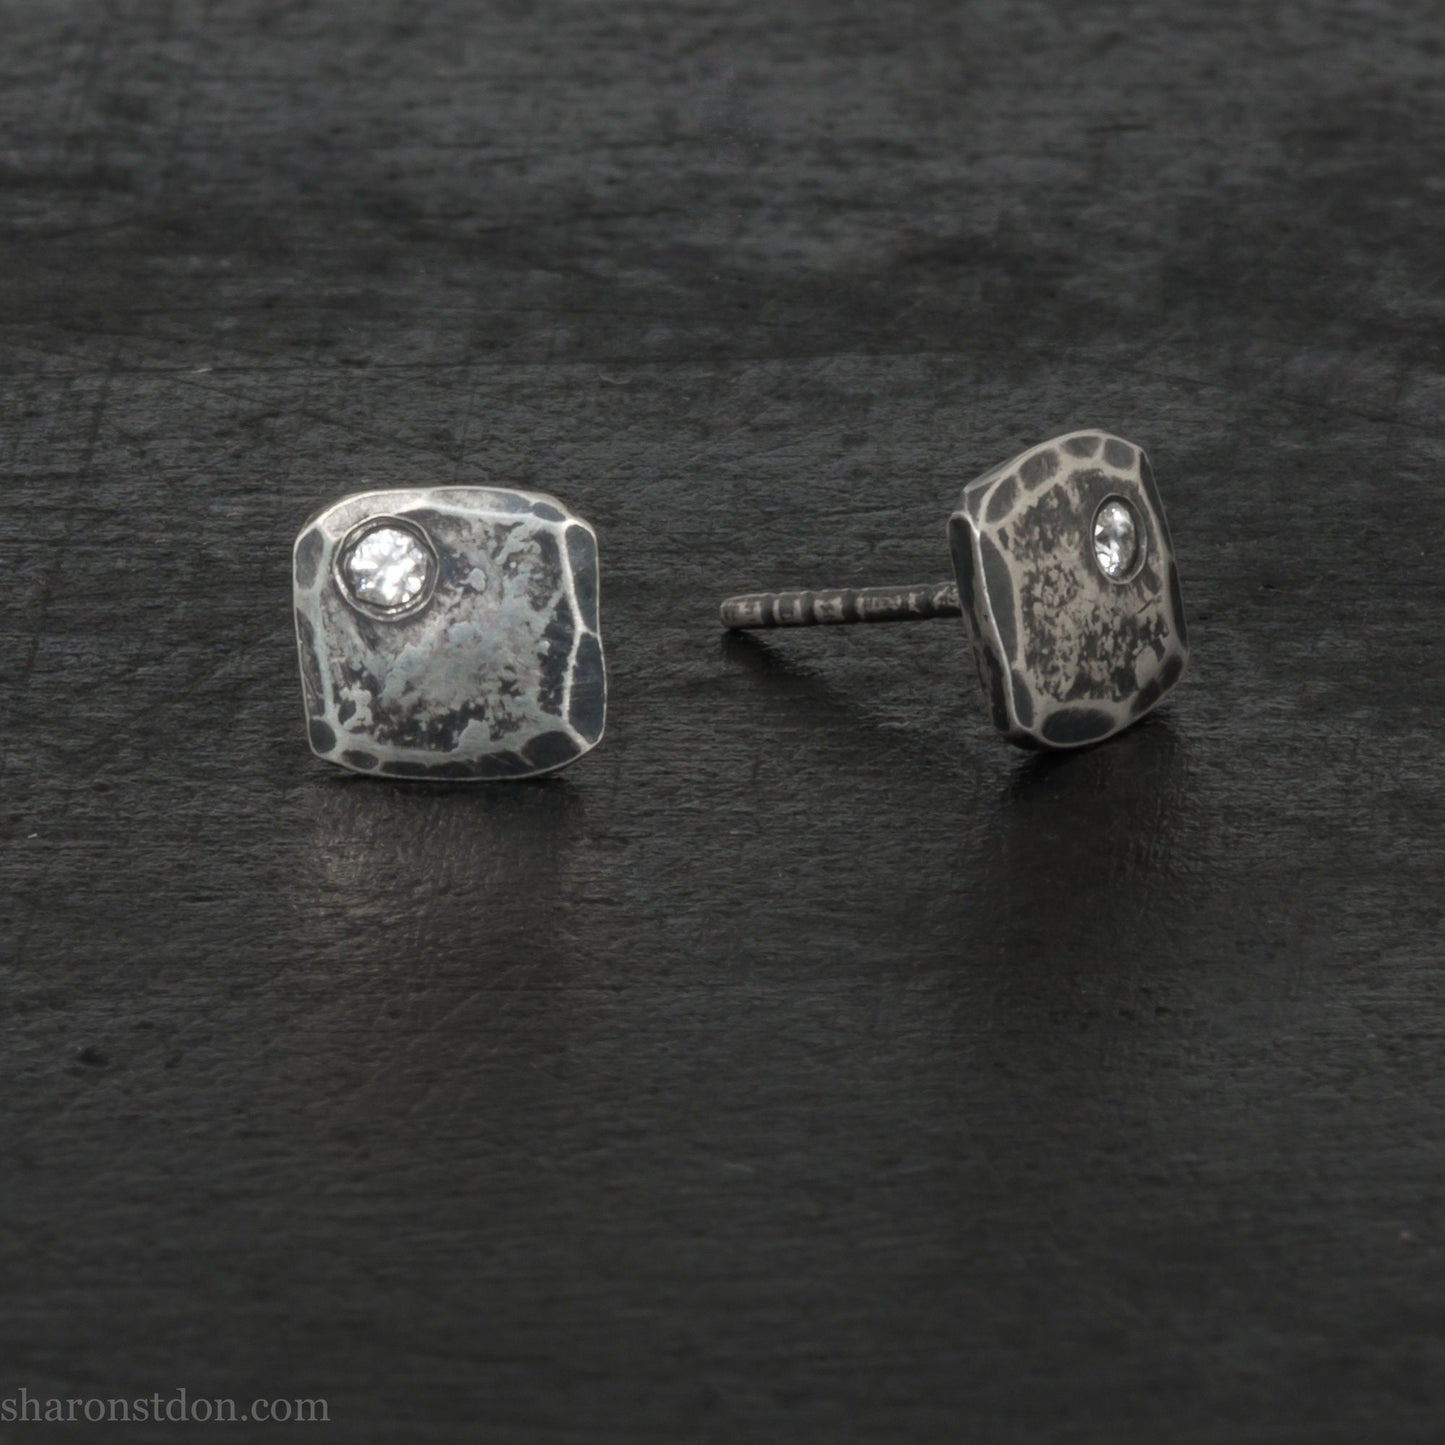 Canadian diamond handmade stud earrings for men or women | Certified Candamark diamonds and 925 sterling silver, antiqued dark texture